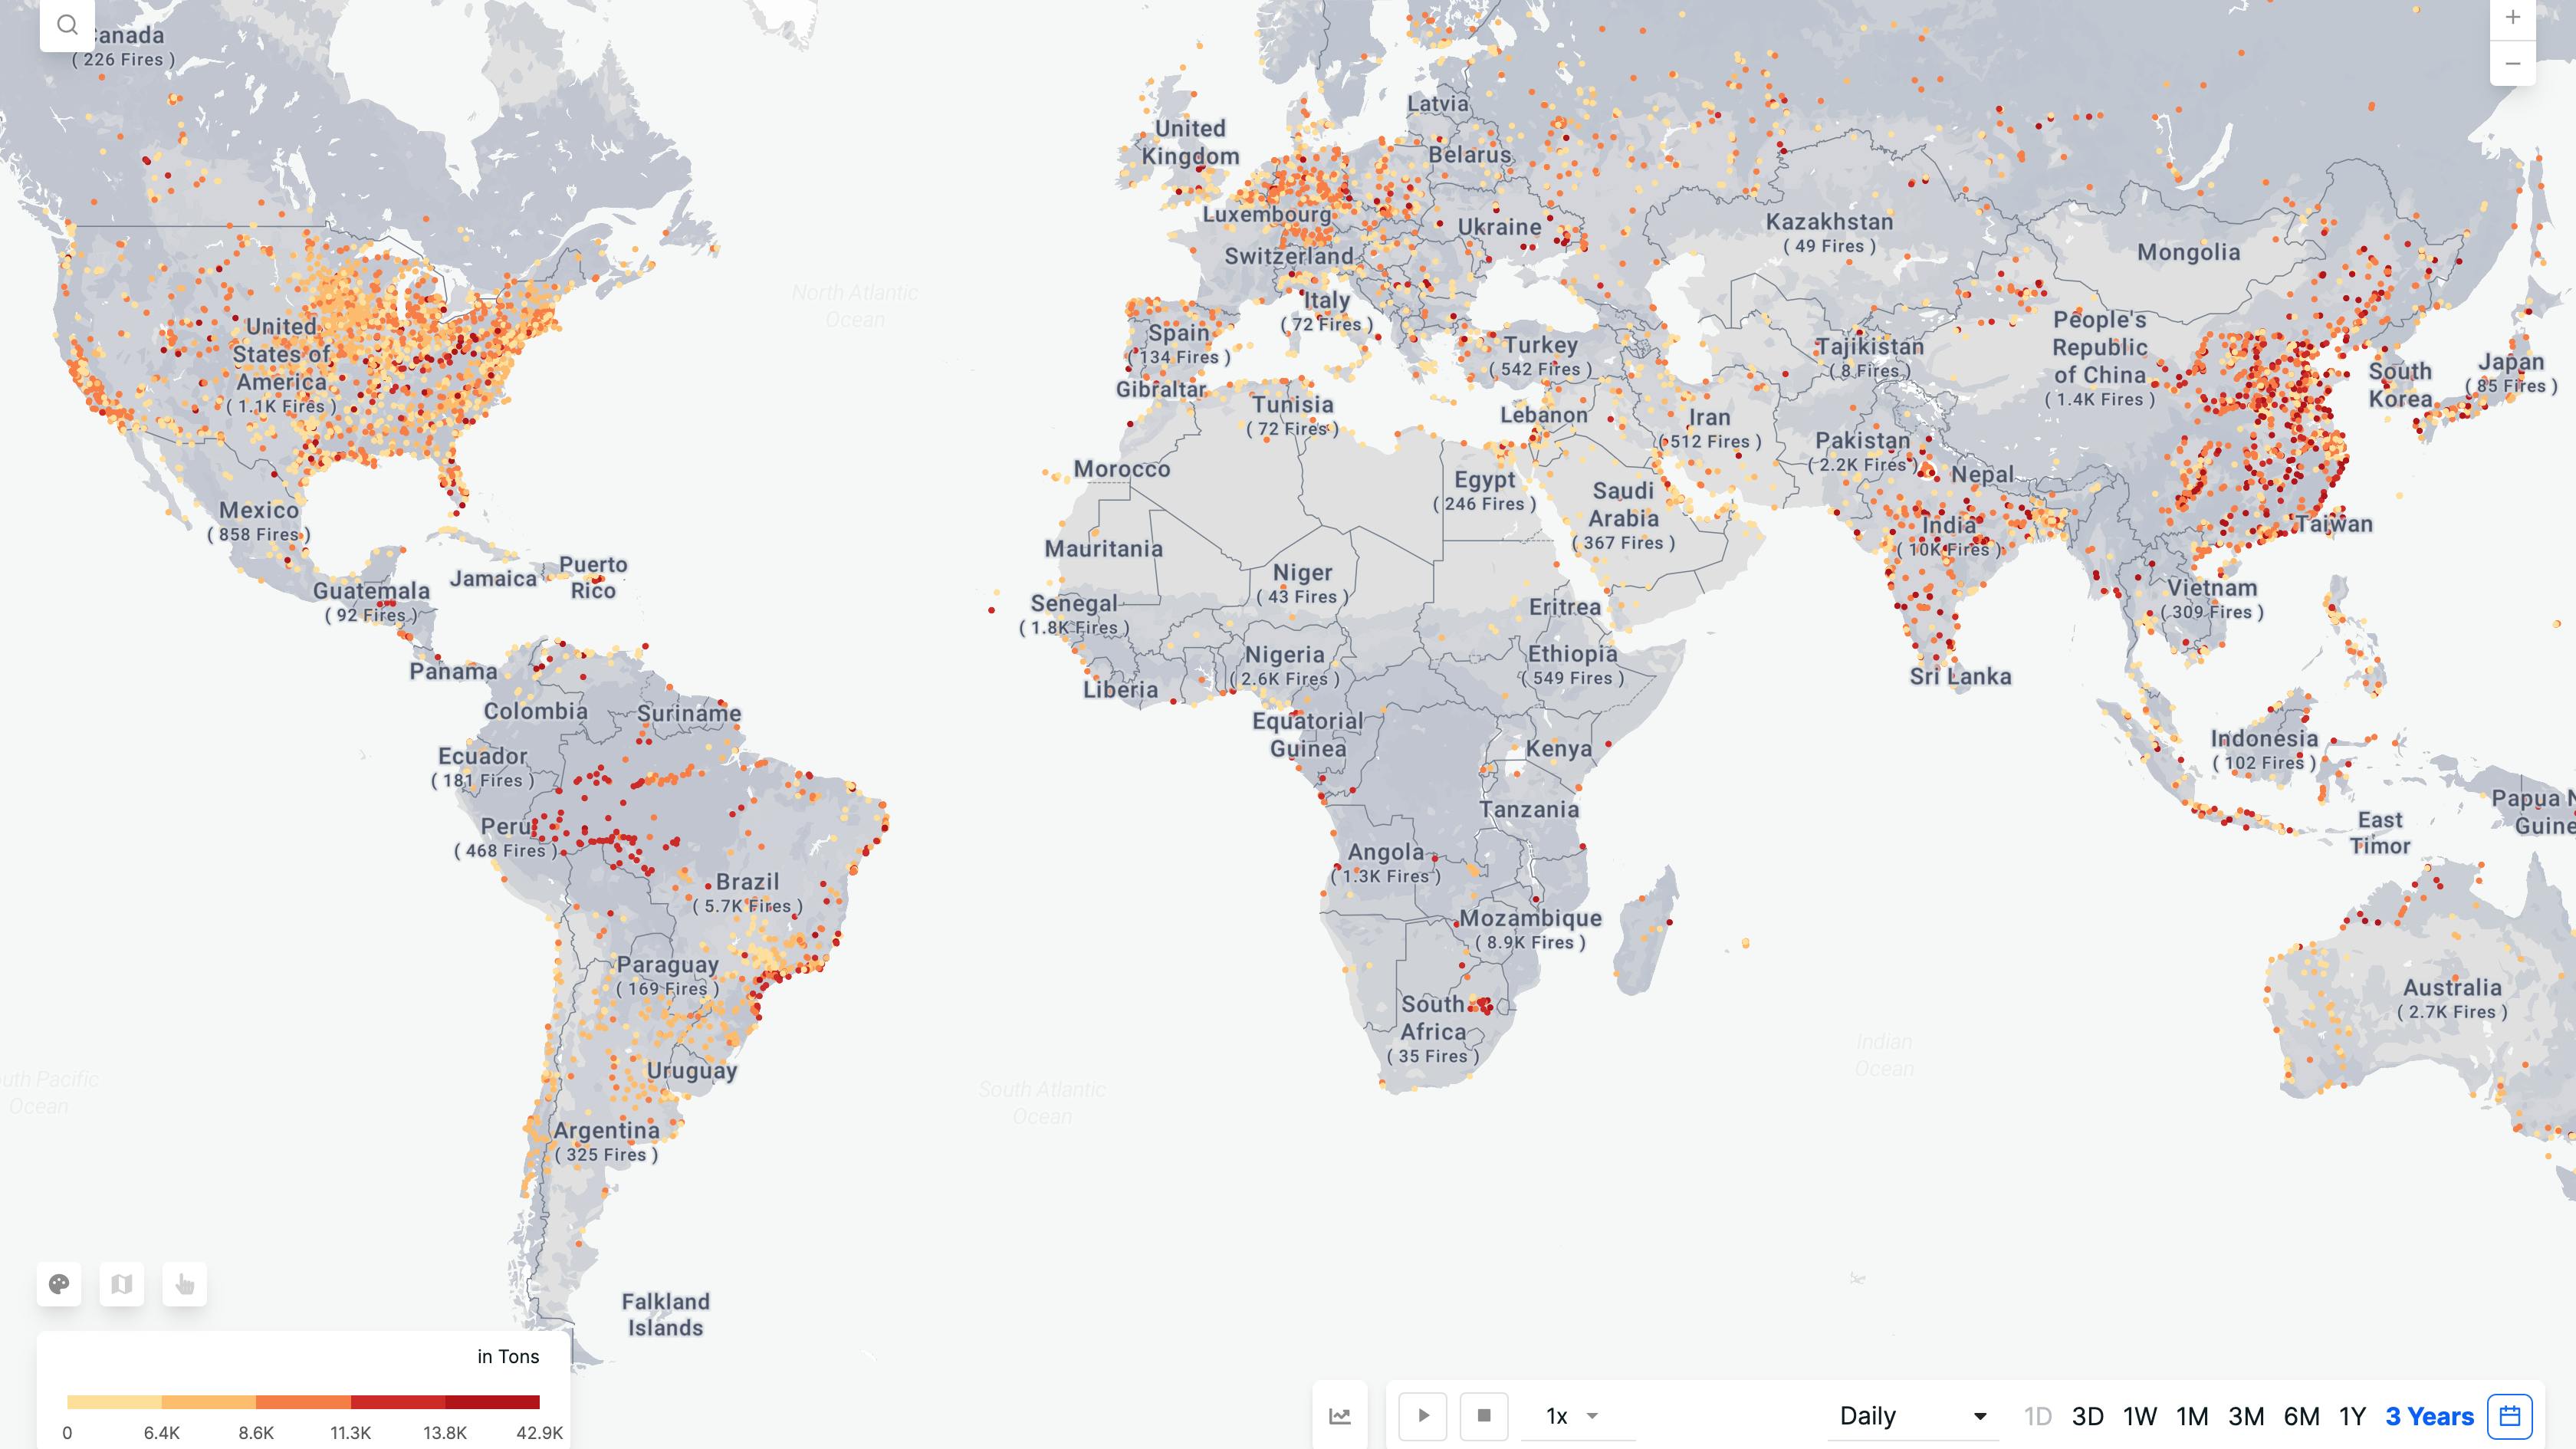 Global distribution of power plants colored according to their estimated CO2 emissions